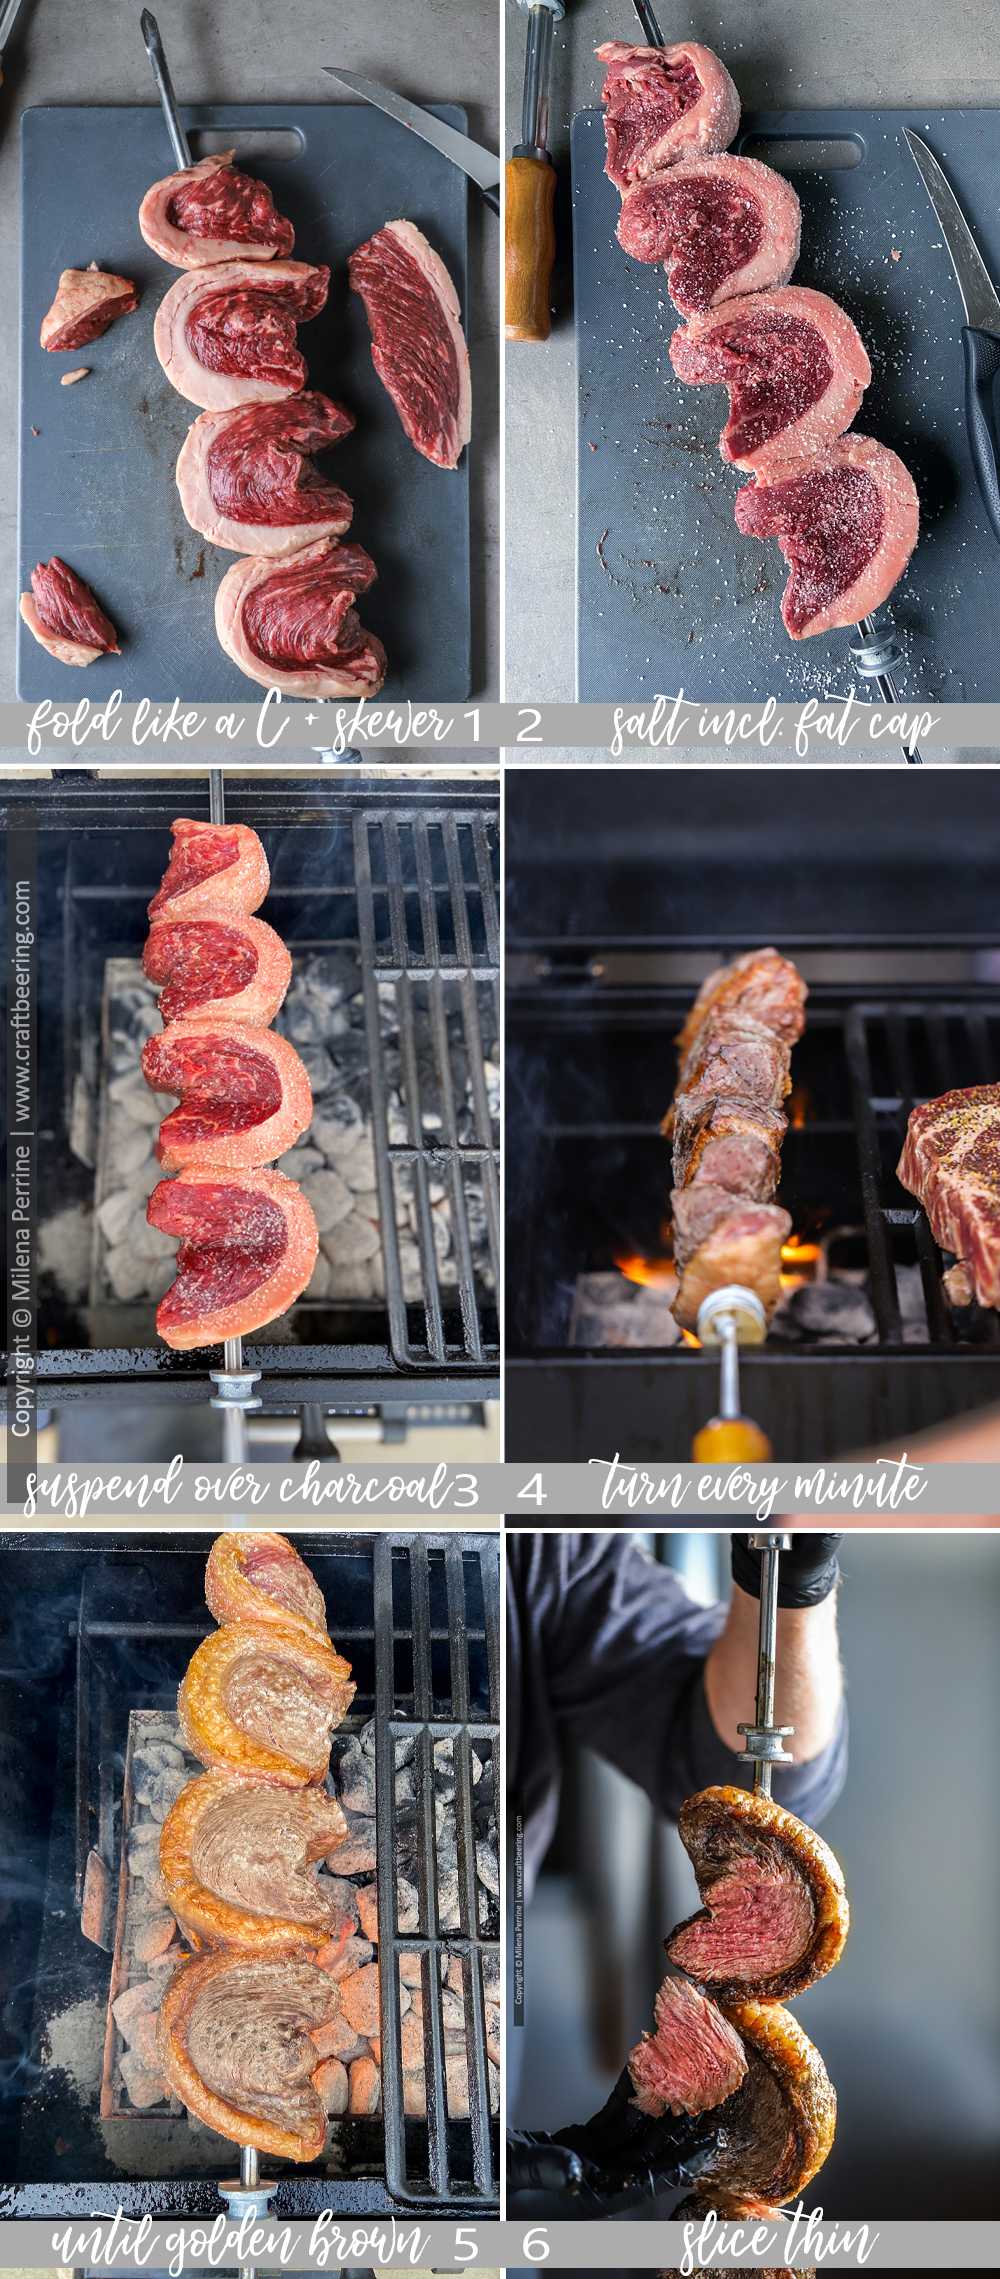 How to cook picanha steak in the traditional Brazilian churrasco style.